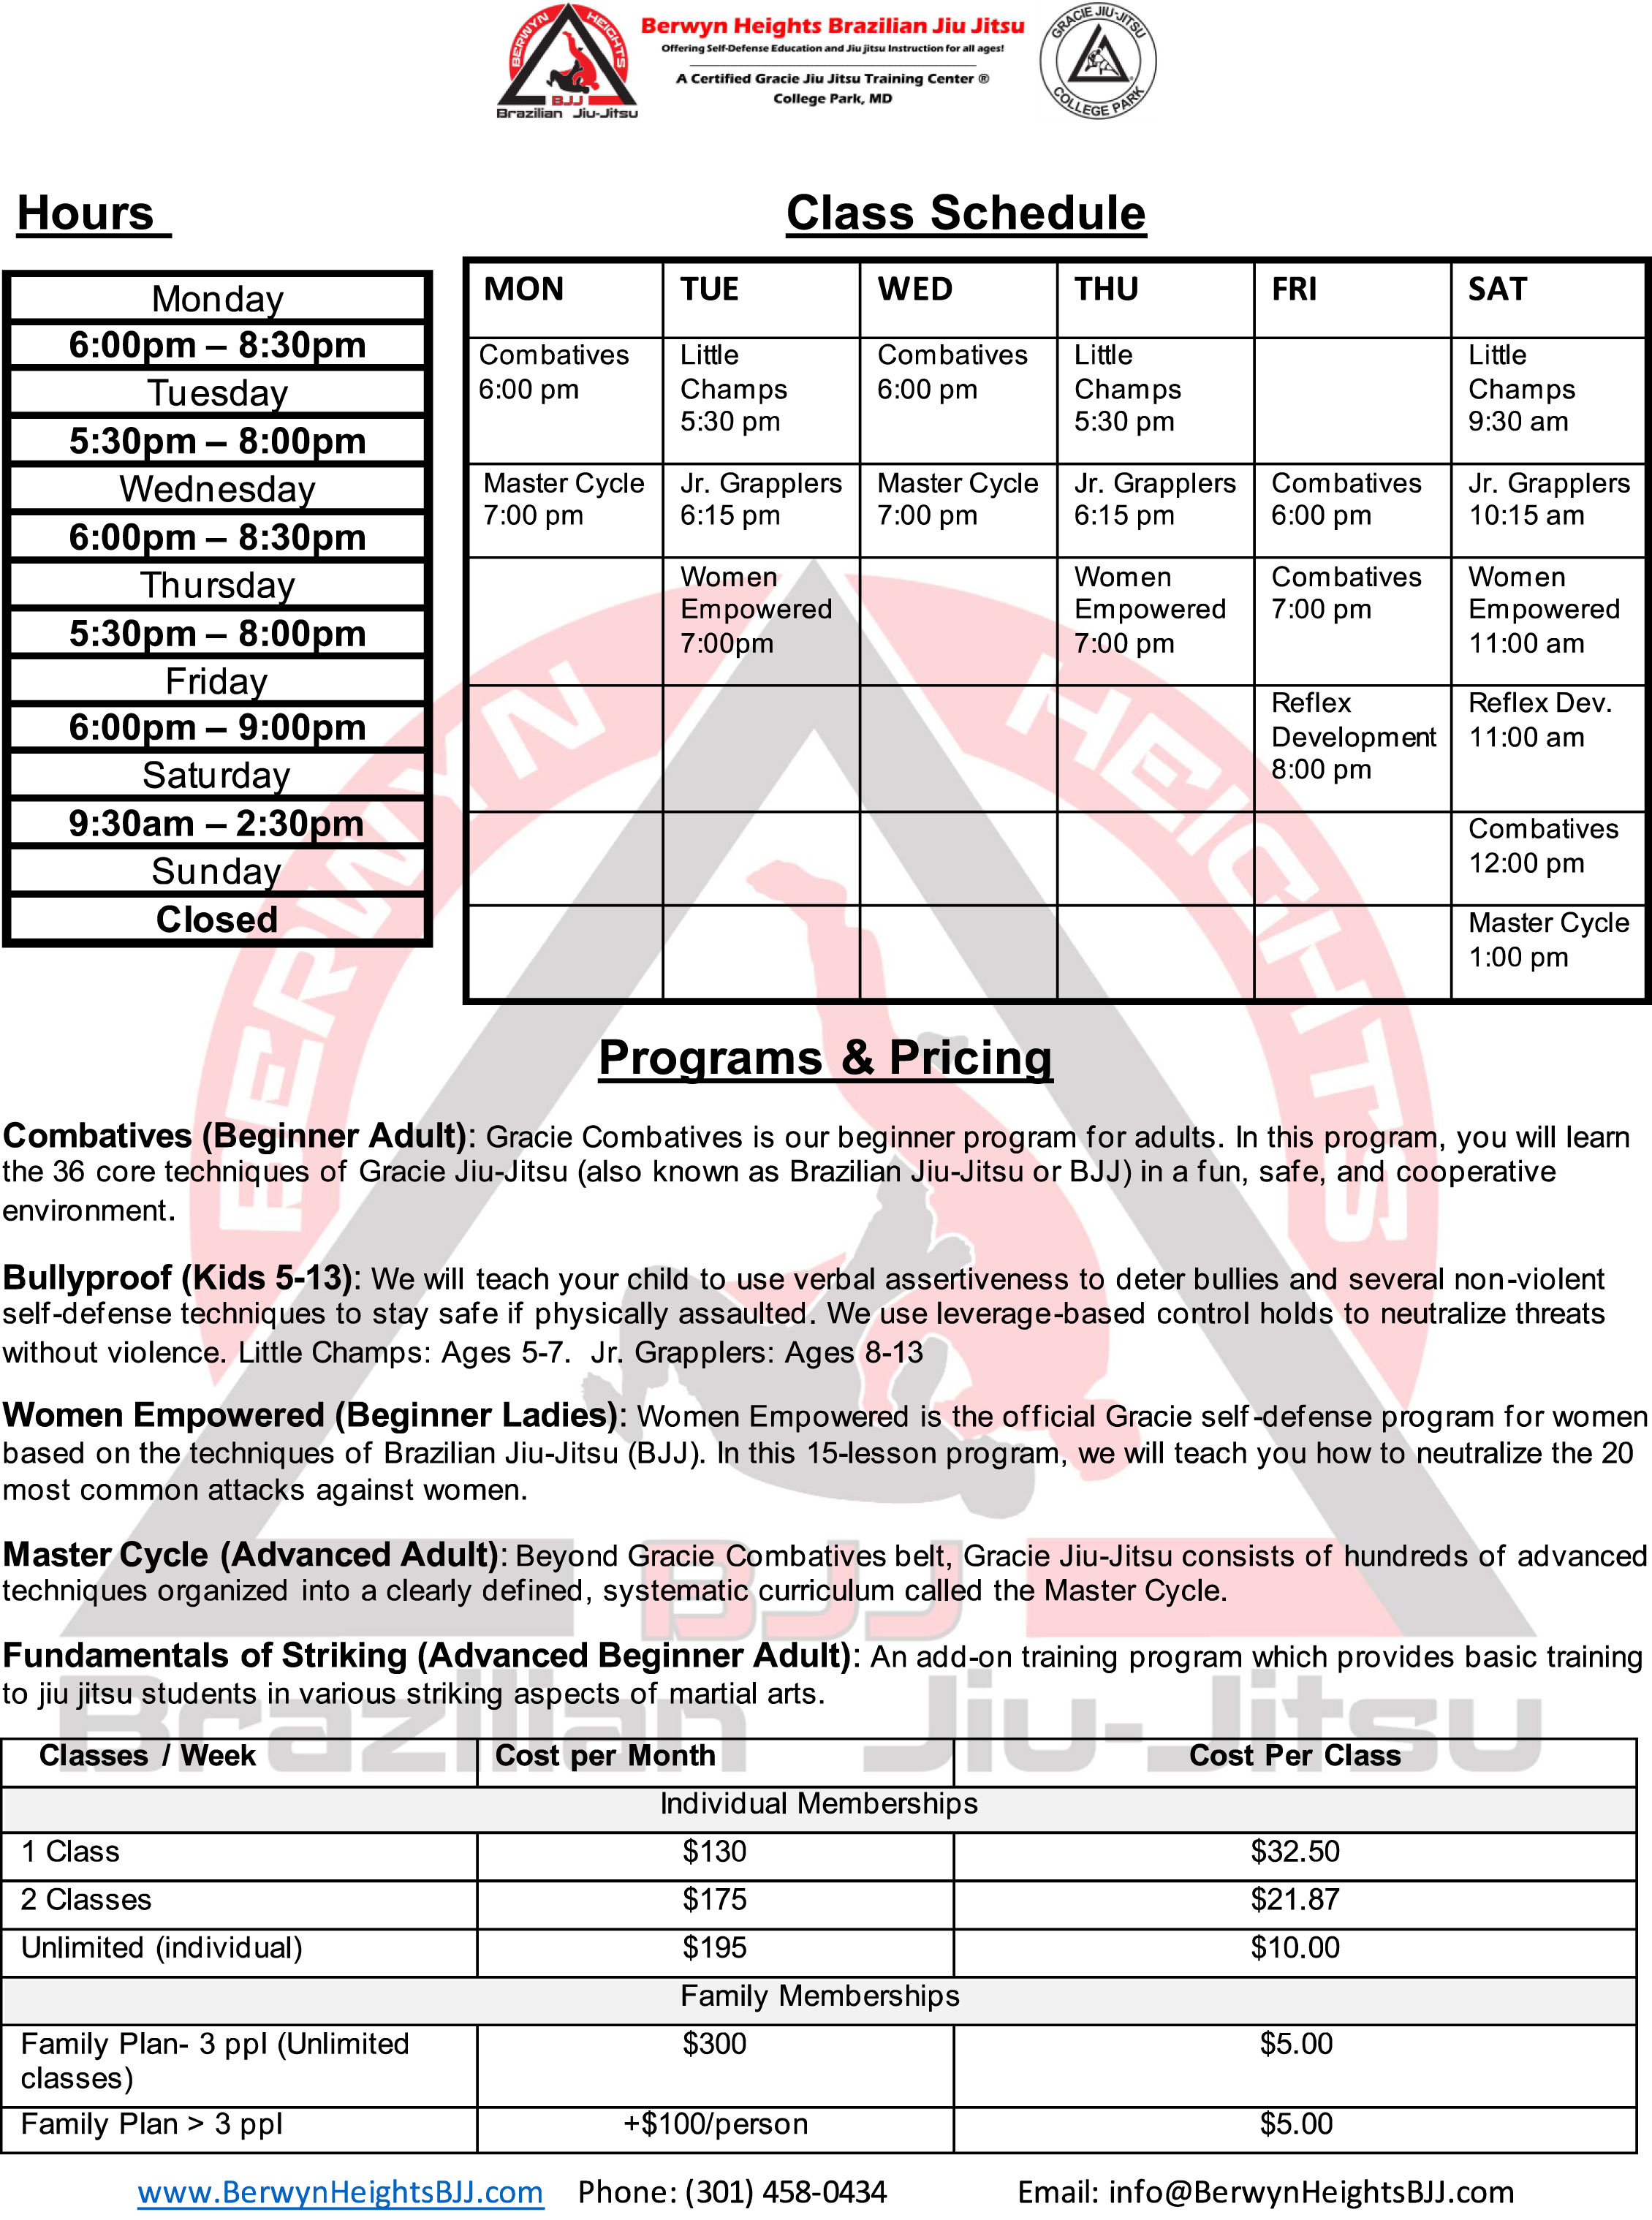 BHBJJ Class Schedule and Pricing